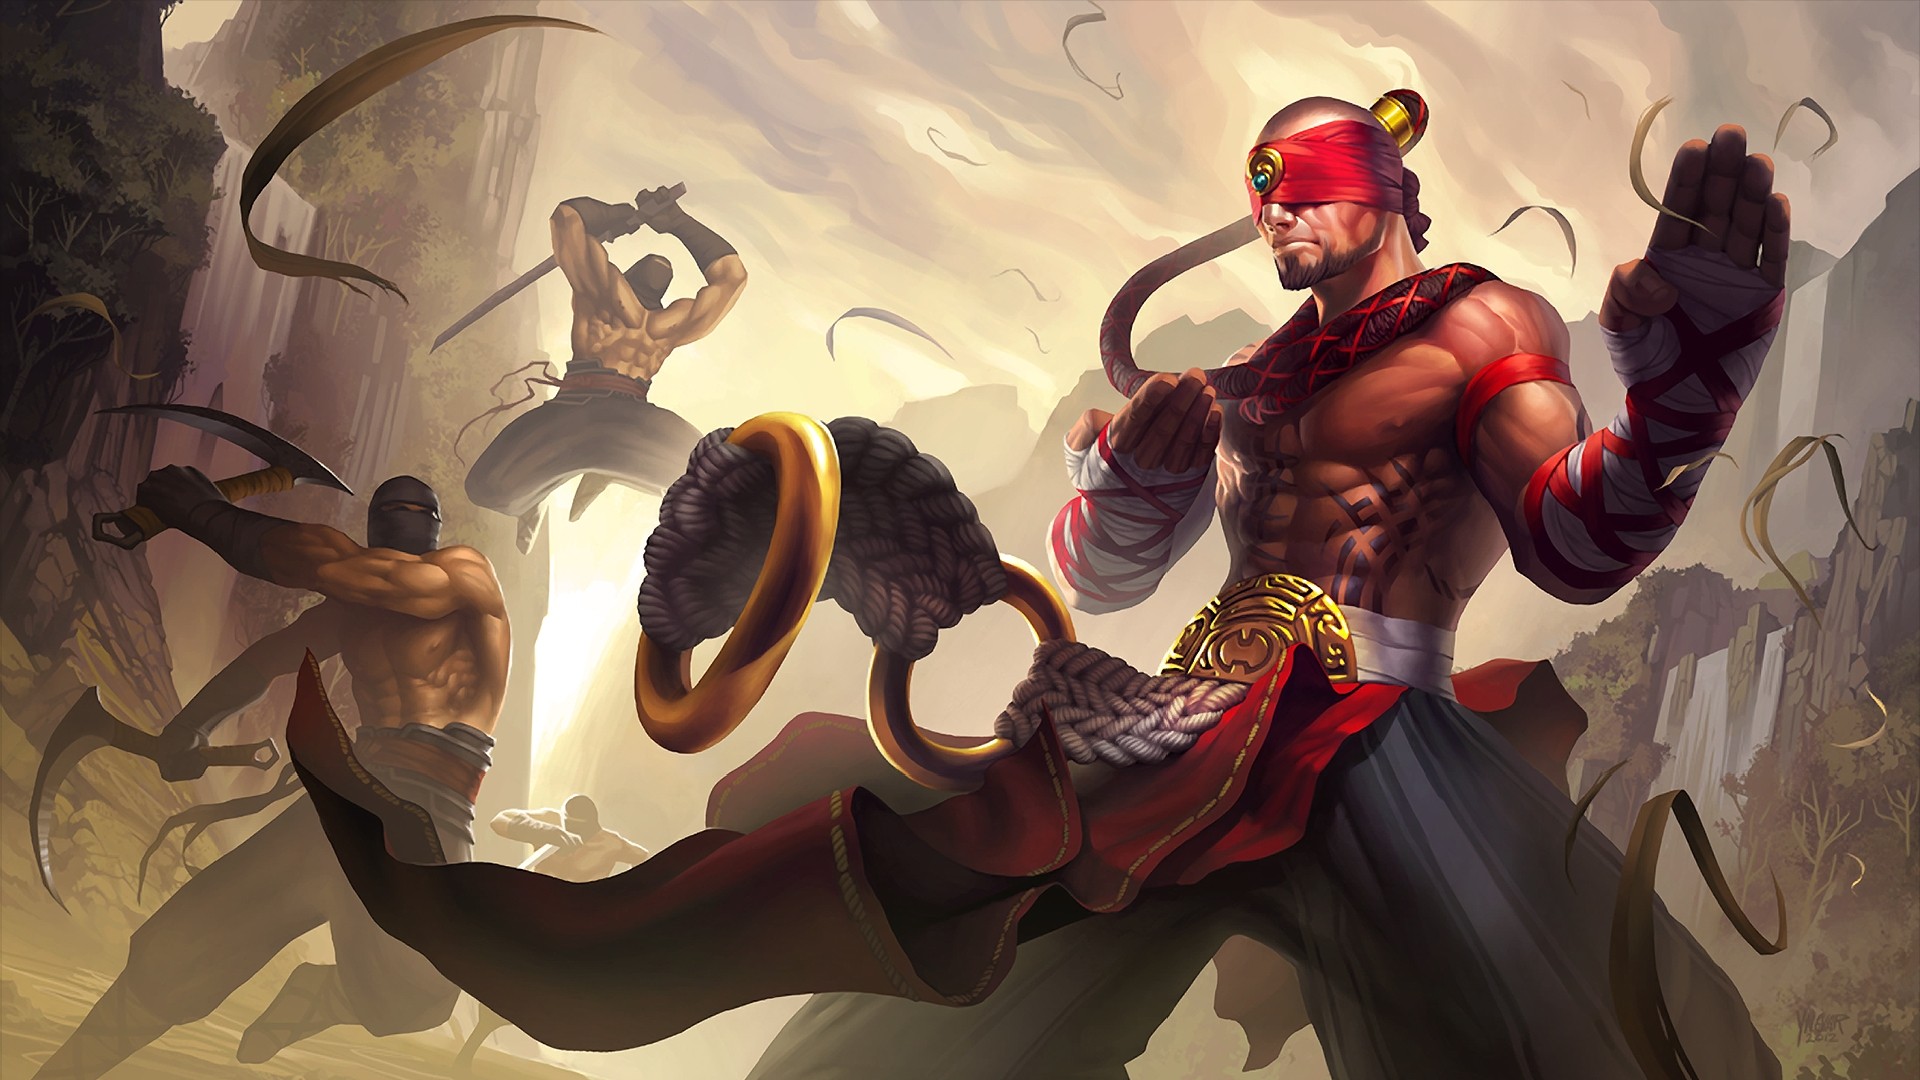 General 1920x1080 League of Legends video games artwork video game art Lee Sin (League of Legends) fan art PC gaming muscular